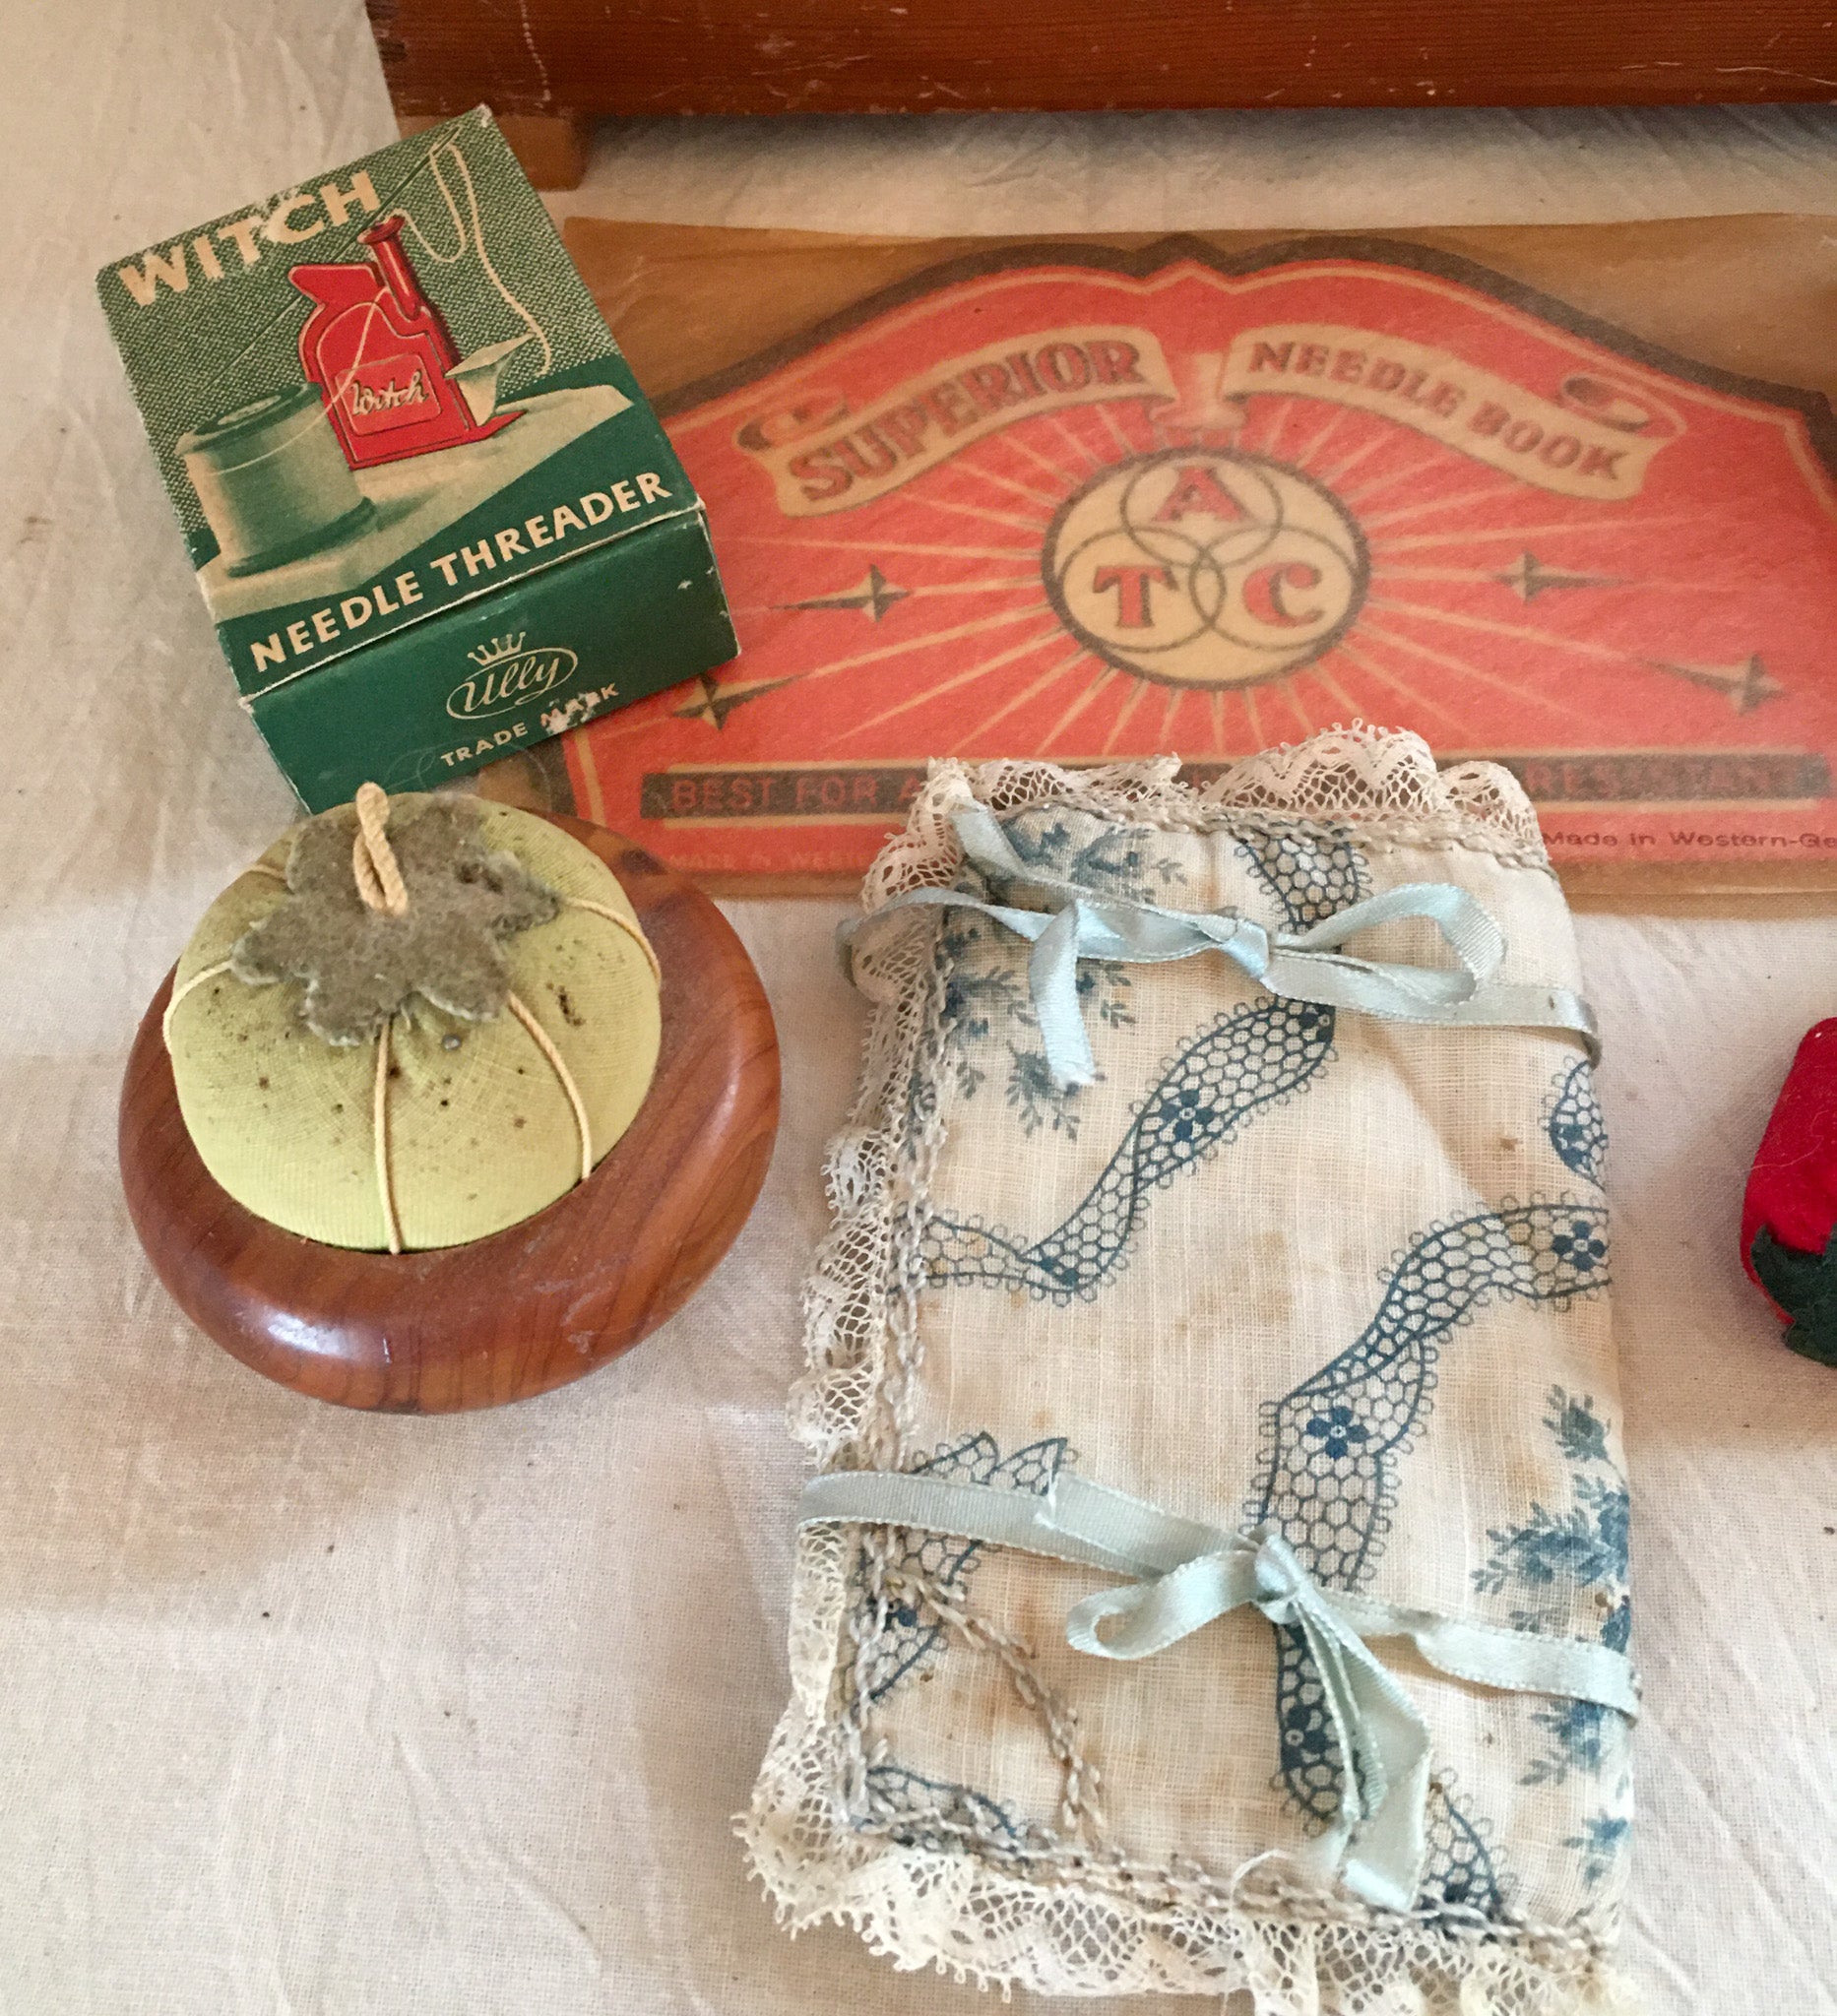 1946 Wooden Jewel/Sewing Box with Contents